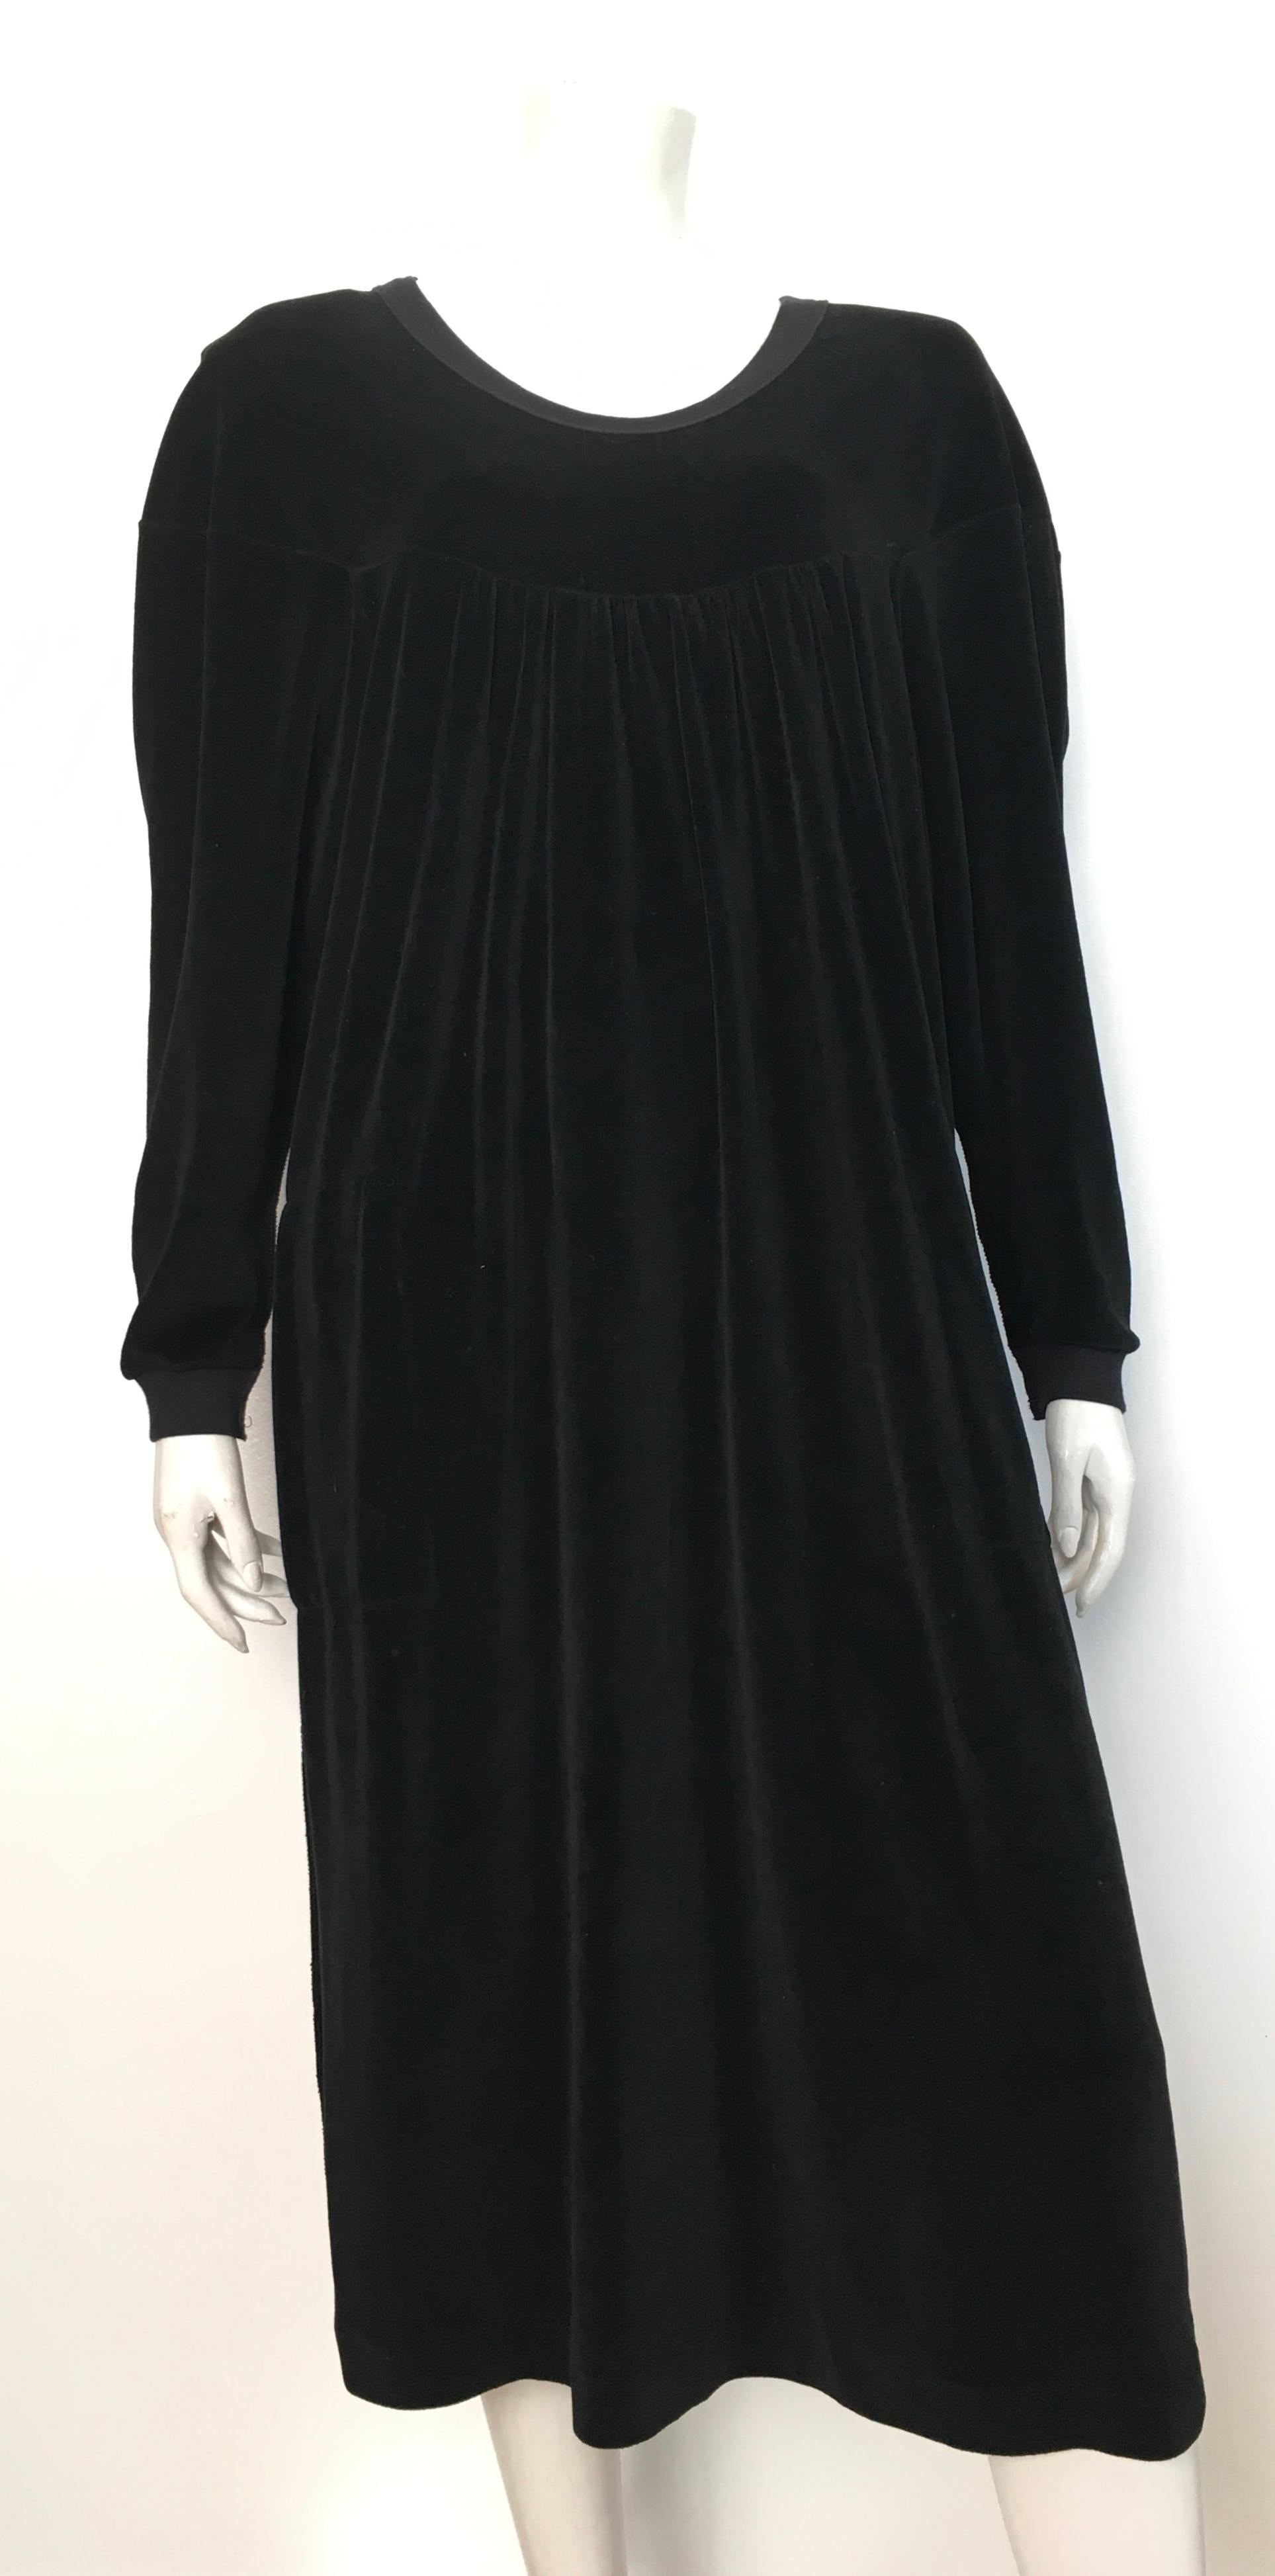 Sonia Rykiel 1980s black cotton velour baggy dress with pockets & matching cardigan is a size large. This dress & cardigan were designed to be a baggy fit, a flowing fit.  Stitching is a reverse stitch that became synonymous with the Sonia Rykiel